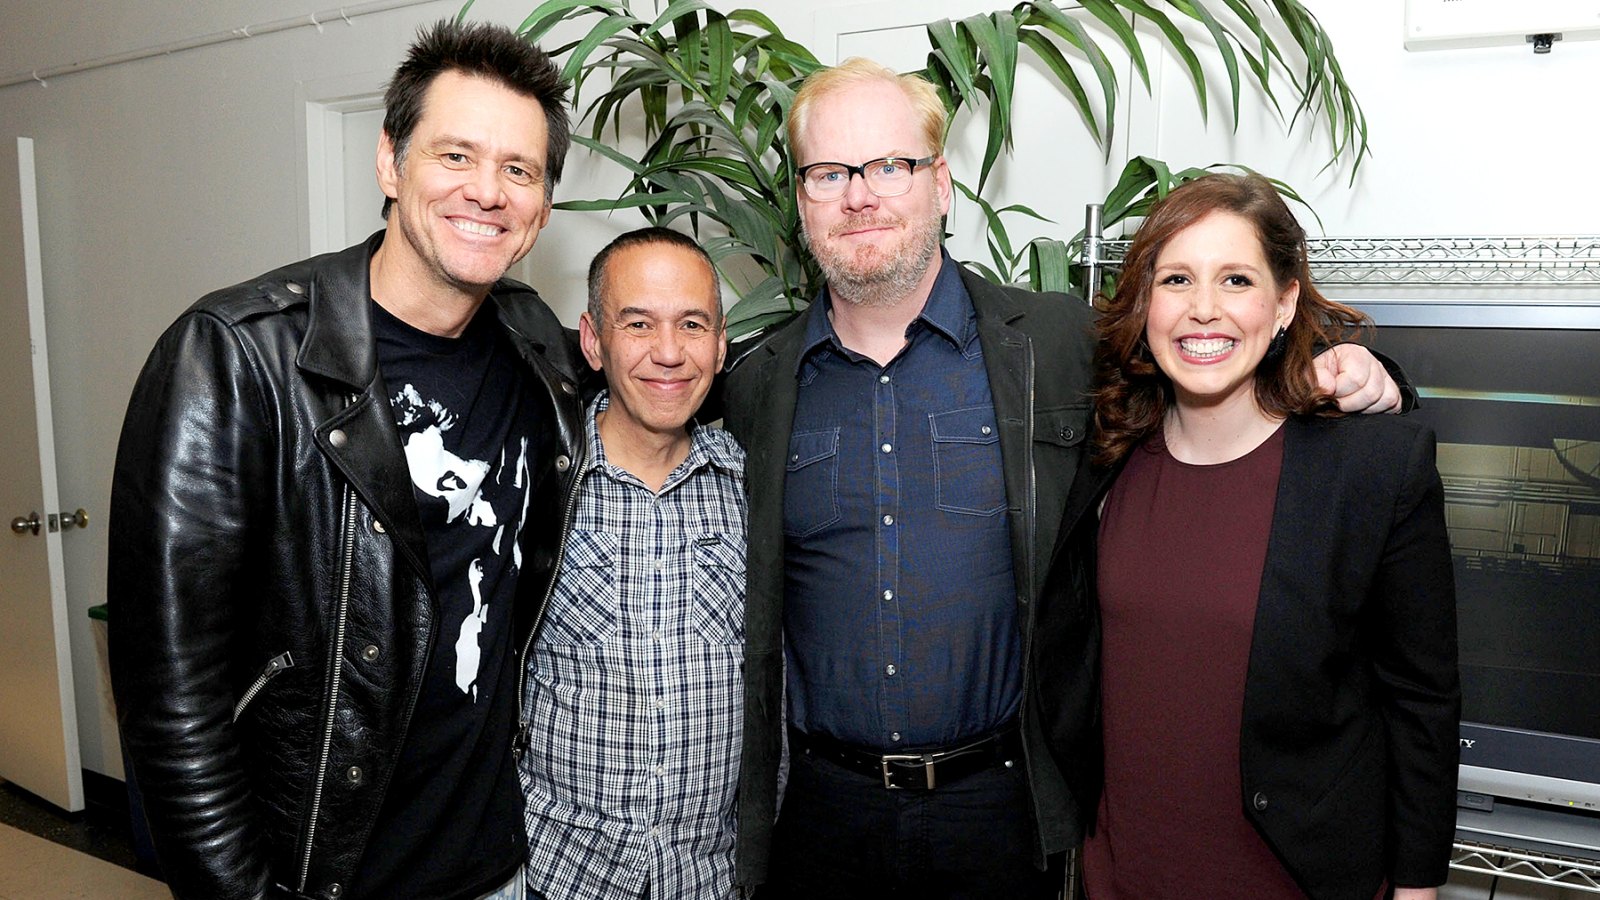 Jim Carrey with Gilbert Gottfried, Jim Gaffigan and Vanessa Bayer (from left) in NYC.